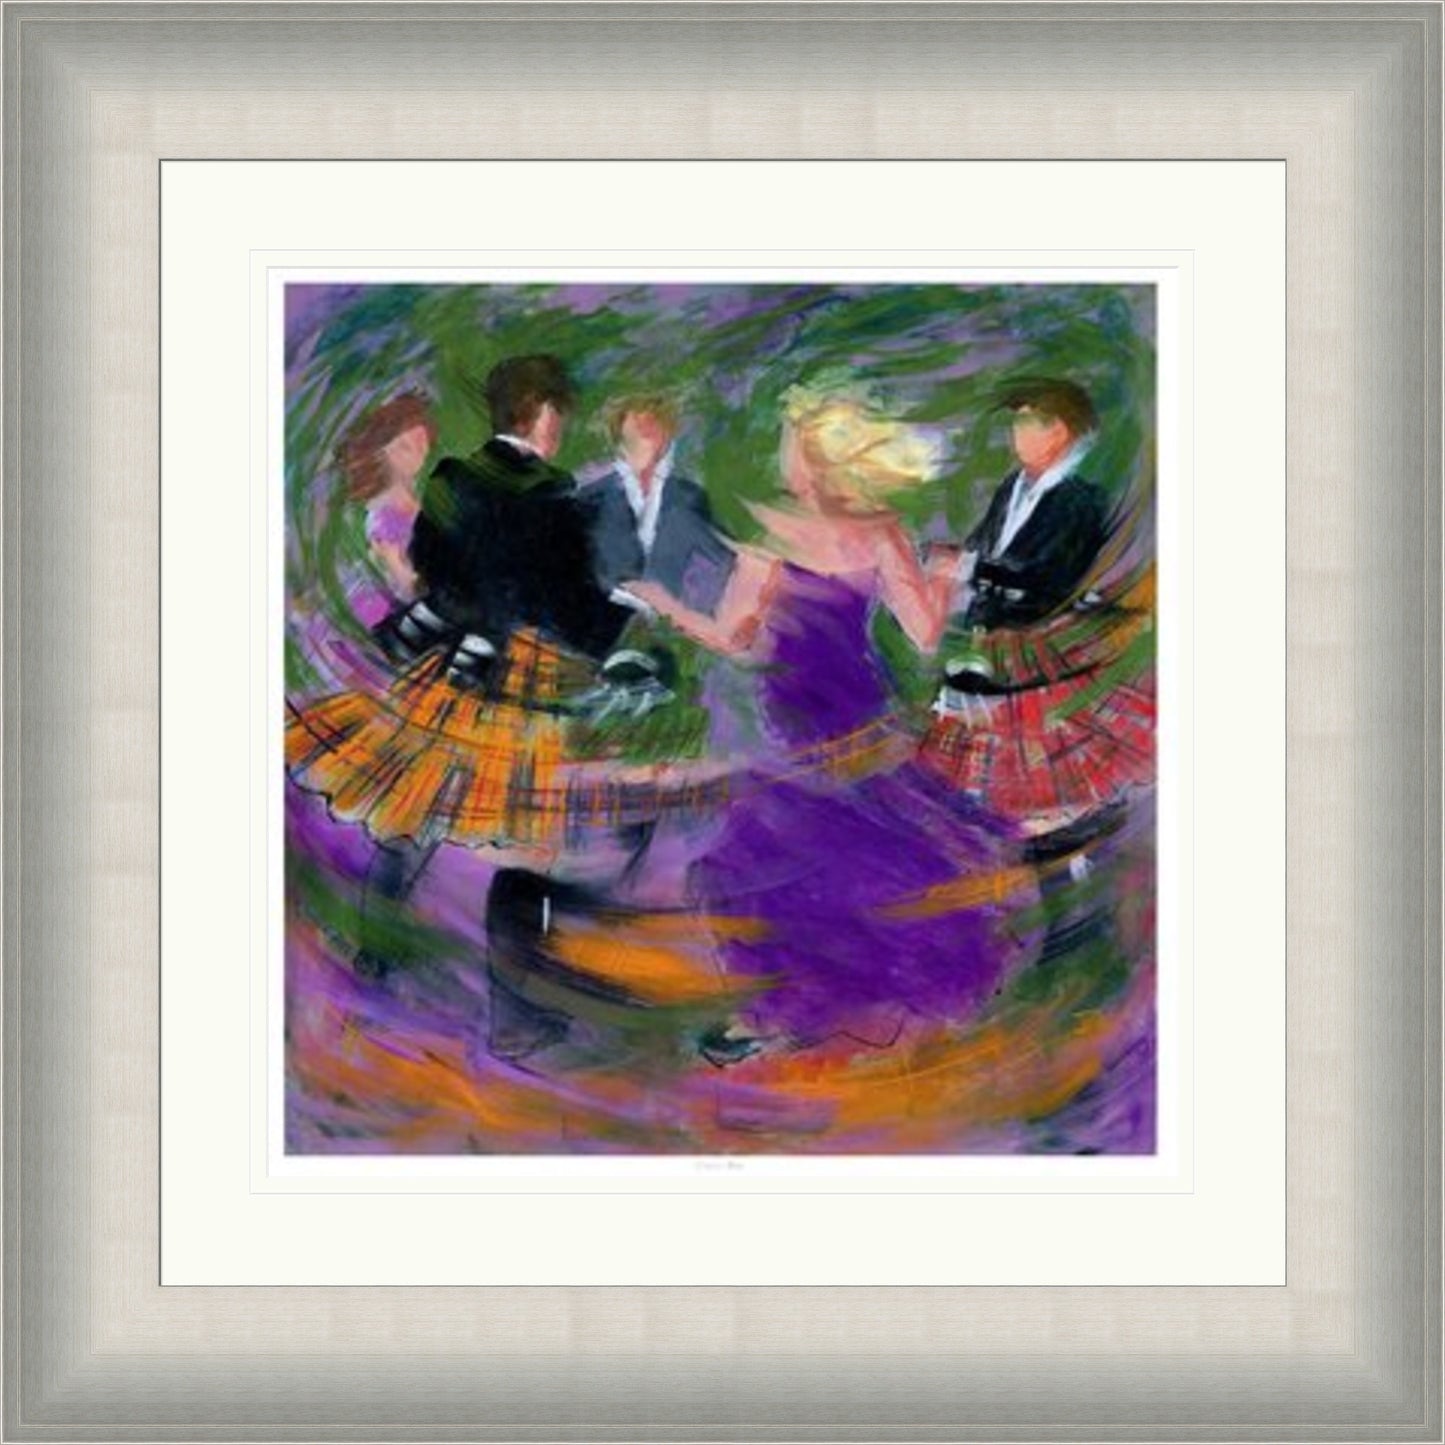 Circling Roon Ceilidh Dancing Art Print by Janet McCrorie